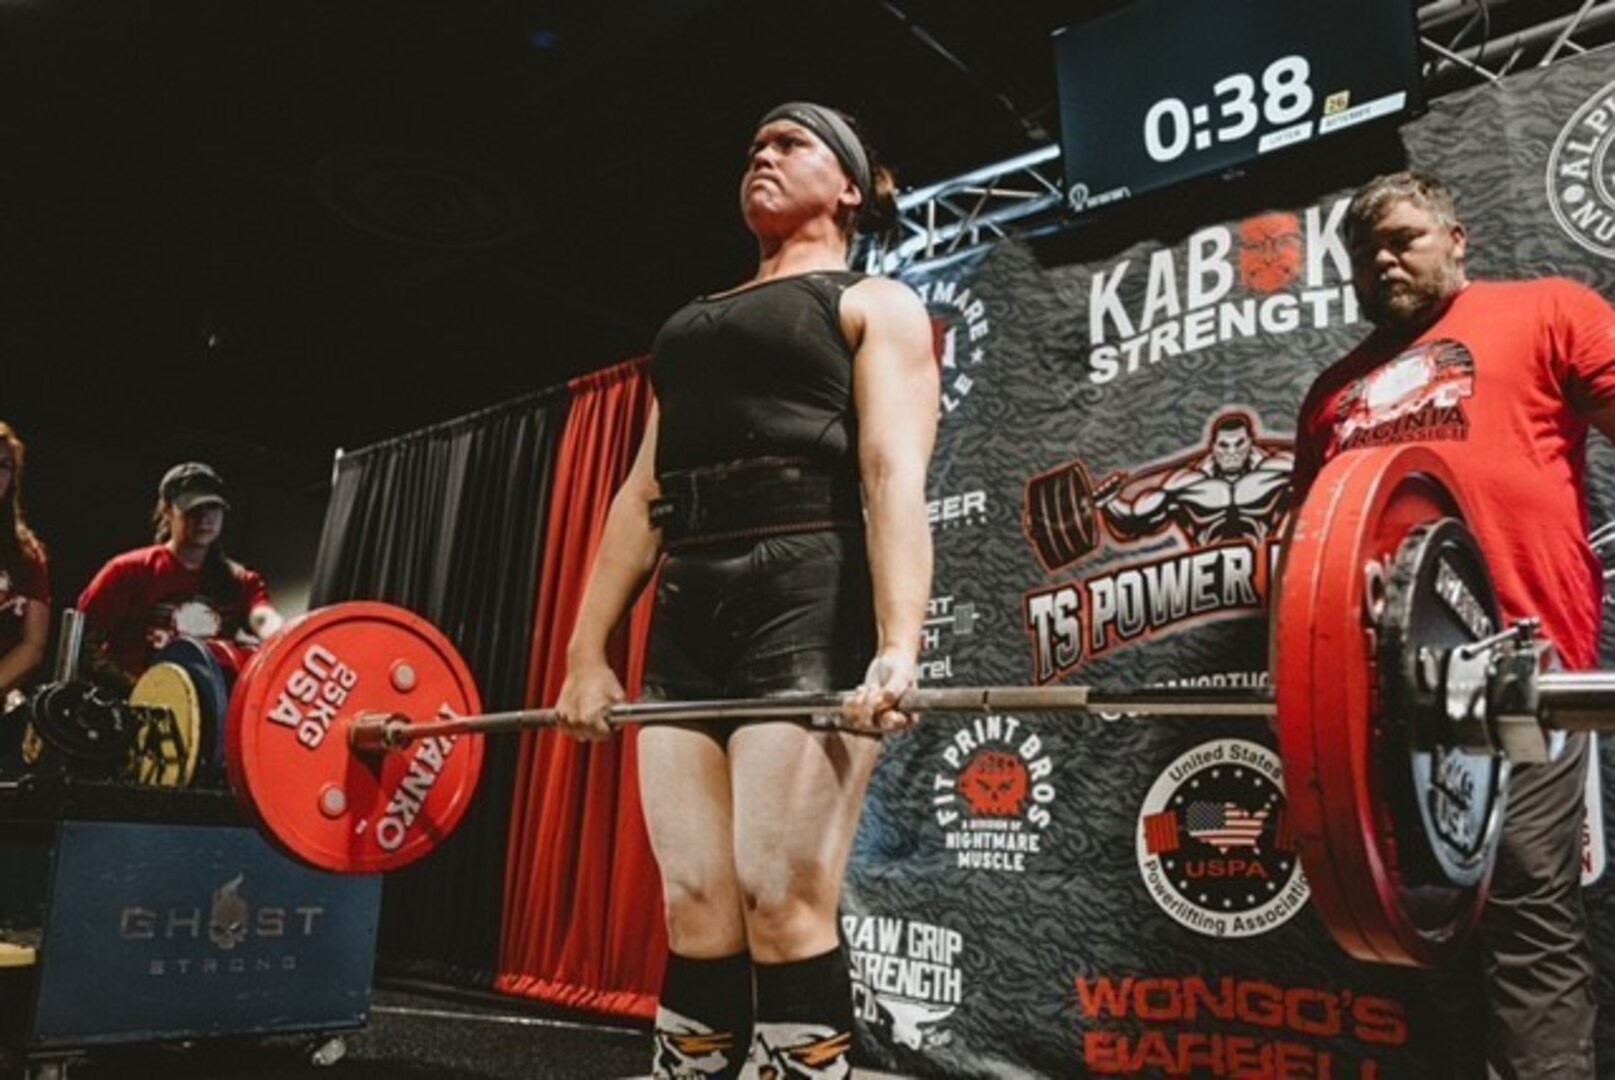 U.S. Navy Lieutenant Commander Holly Vickers competed in the United States Powerlifting Association’s Virginia Beach Classic on March 26, 2022, taking home the top spot for her weight class. Photo used with permission from DVXT Images.